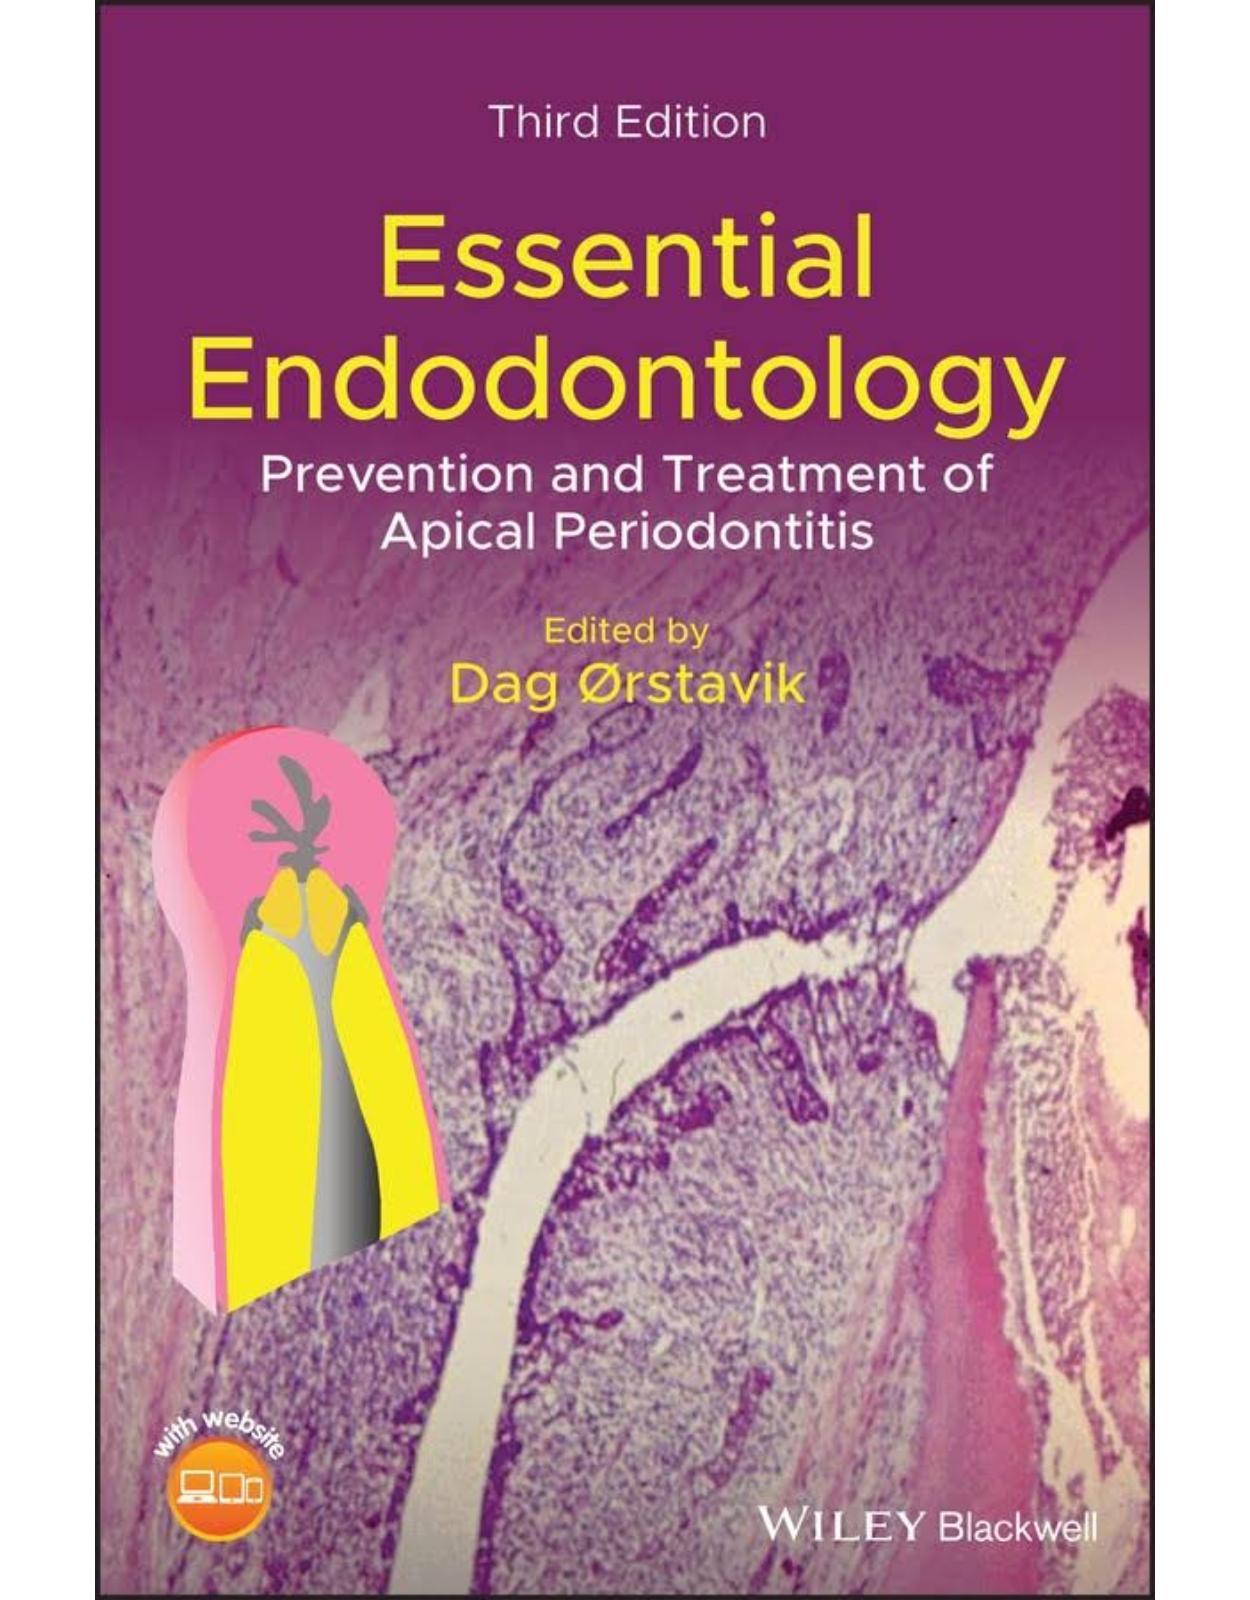 Essential Endodontology: Prevention and Treatment of Apical Periodontitis